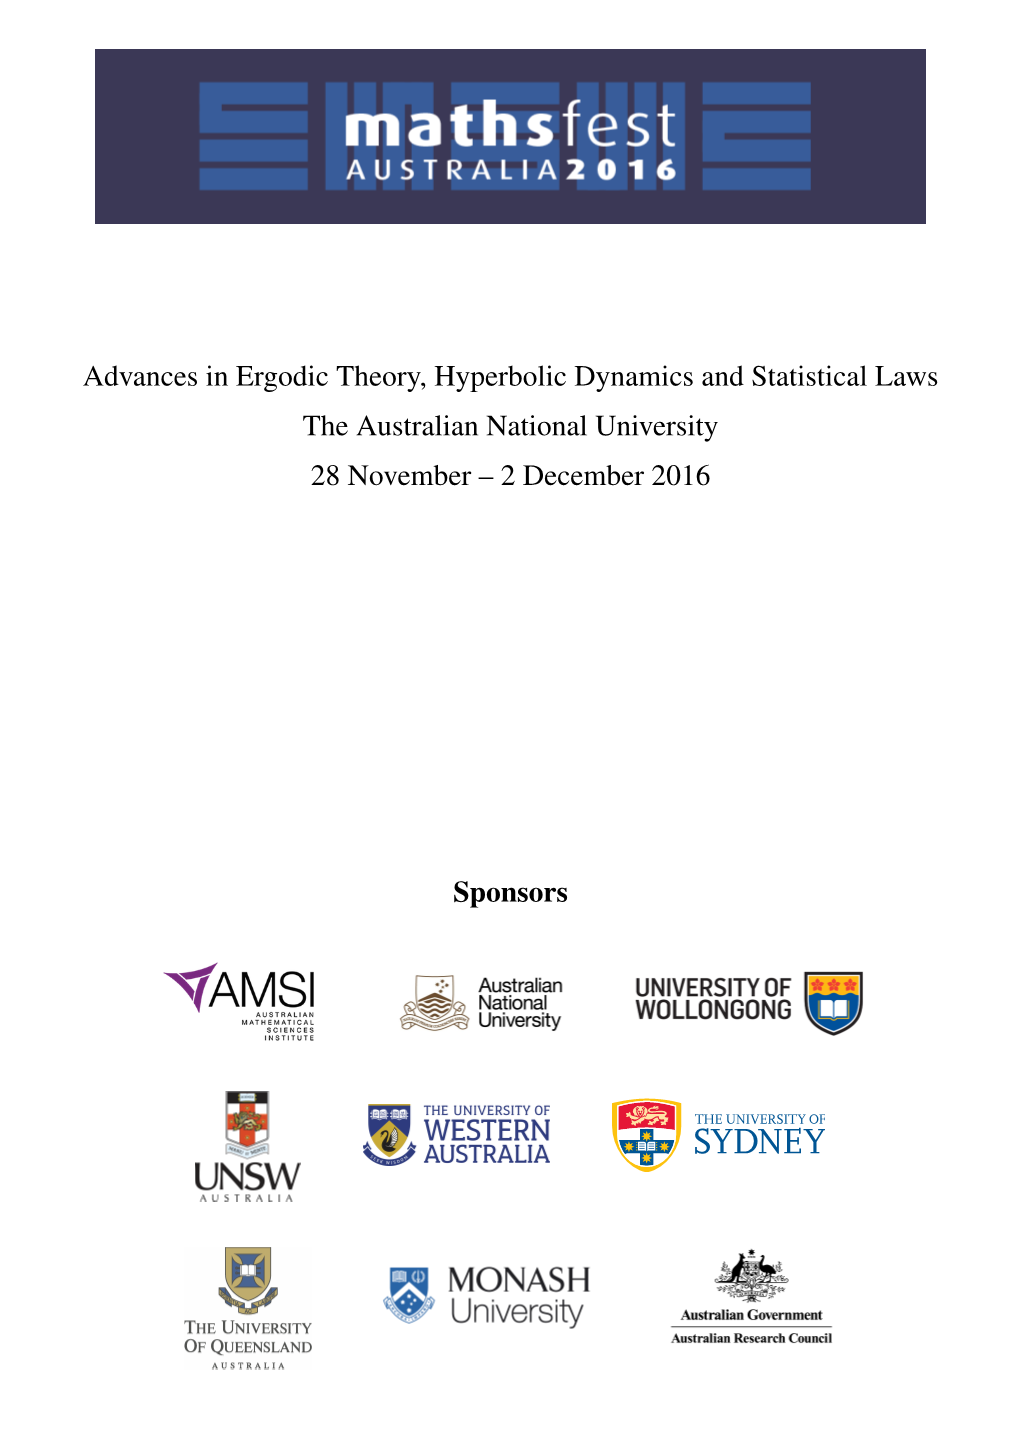 Advances in Ergodic Theory, Hyperbolic Dynamics and Statistical Laws the Australian National University 28 November – 2 December 2016